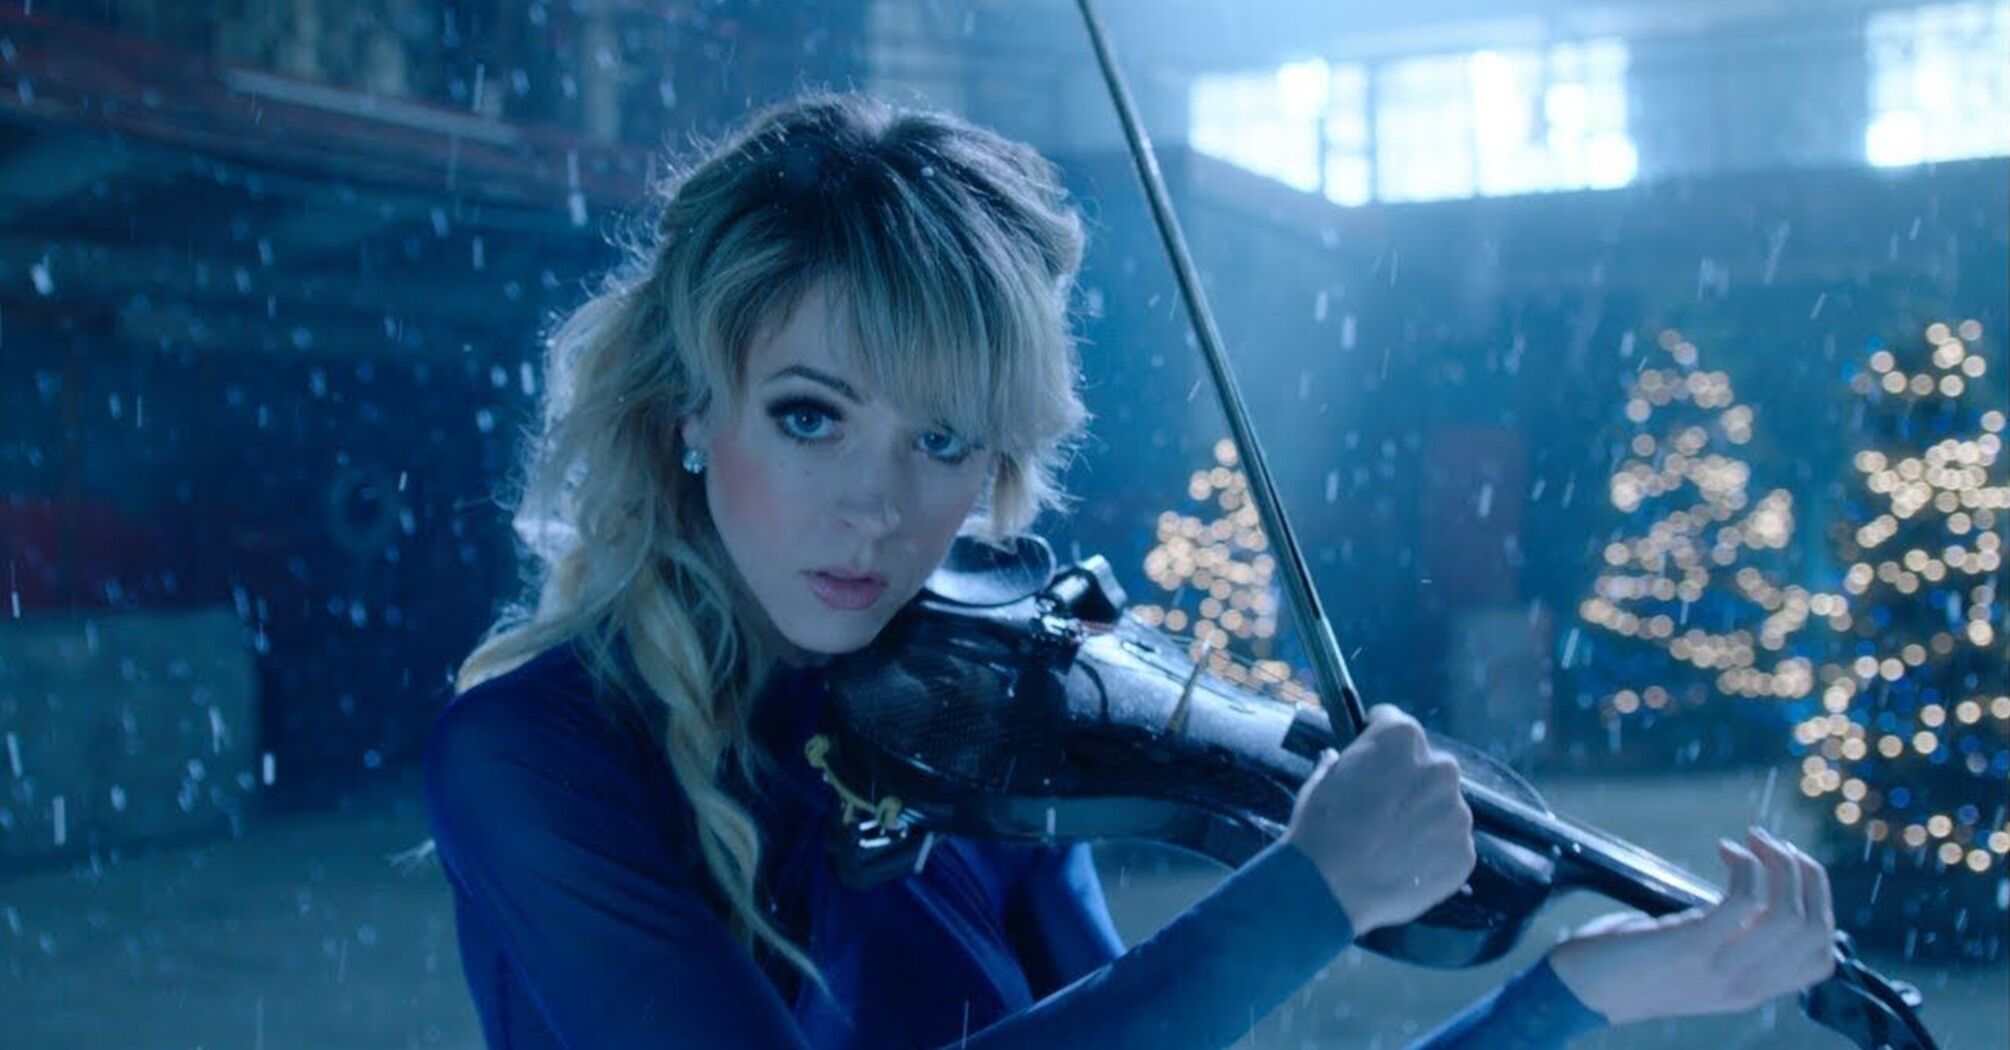 5 facts about Lindsey Sterling: a YouTube star and violinist